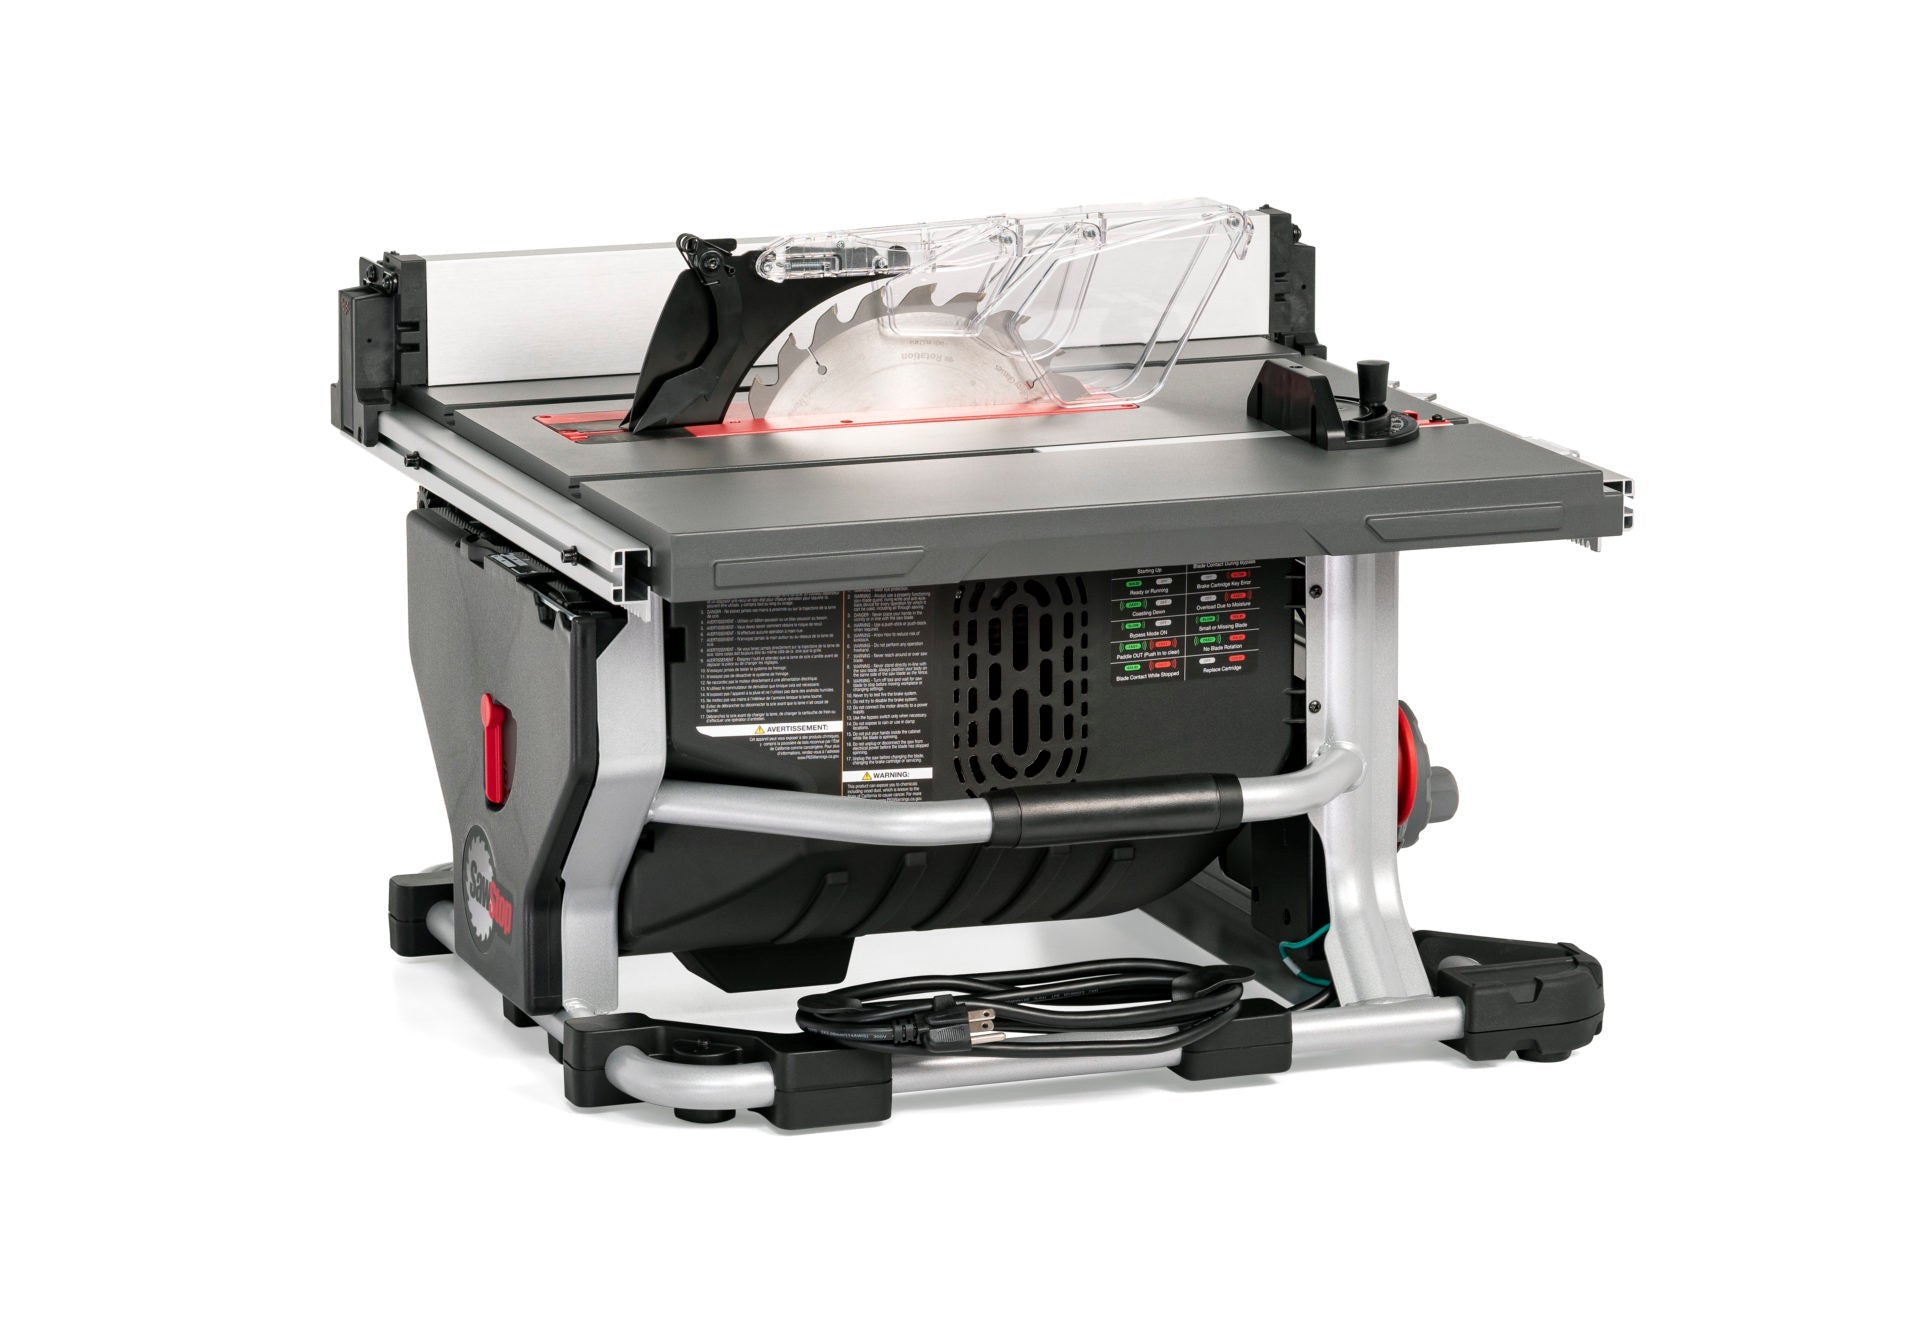 SawStop Compact Table Saw CTS230A50I Power Tool Services